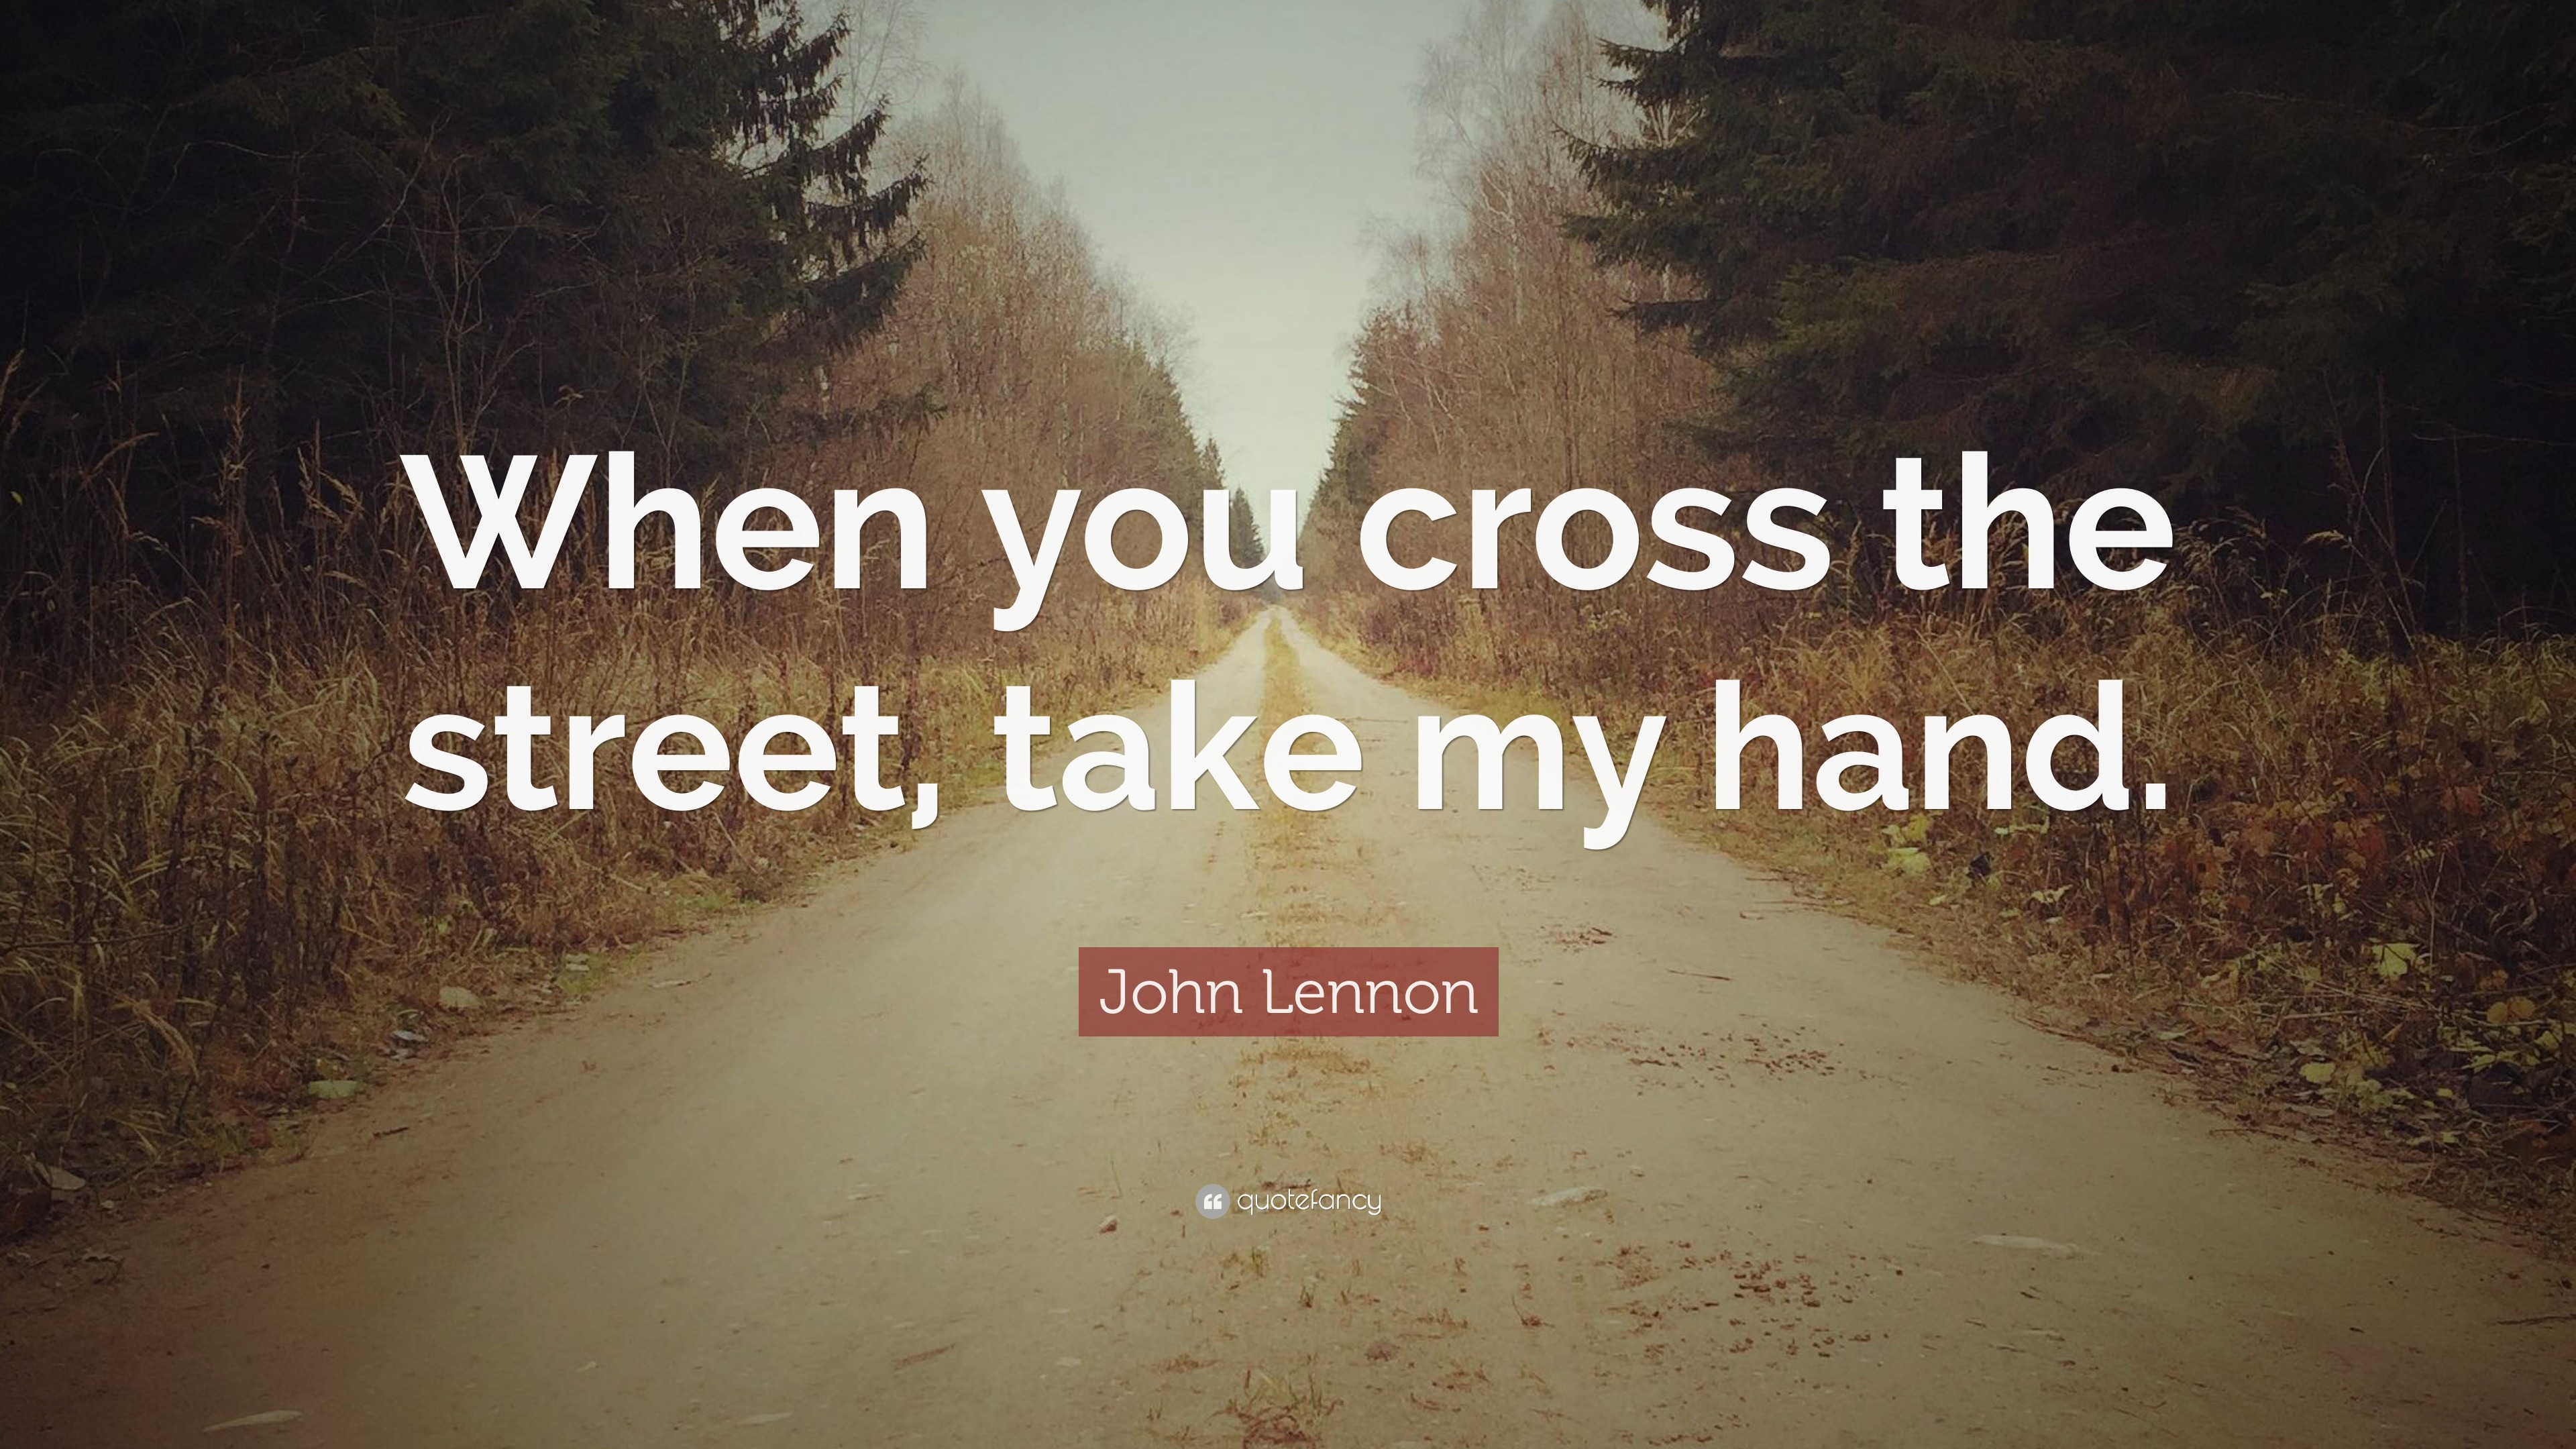 St John The Cross Quotes John Lennon Quote “When You Cross The Street Take